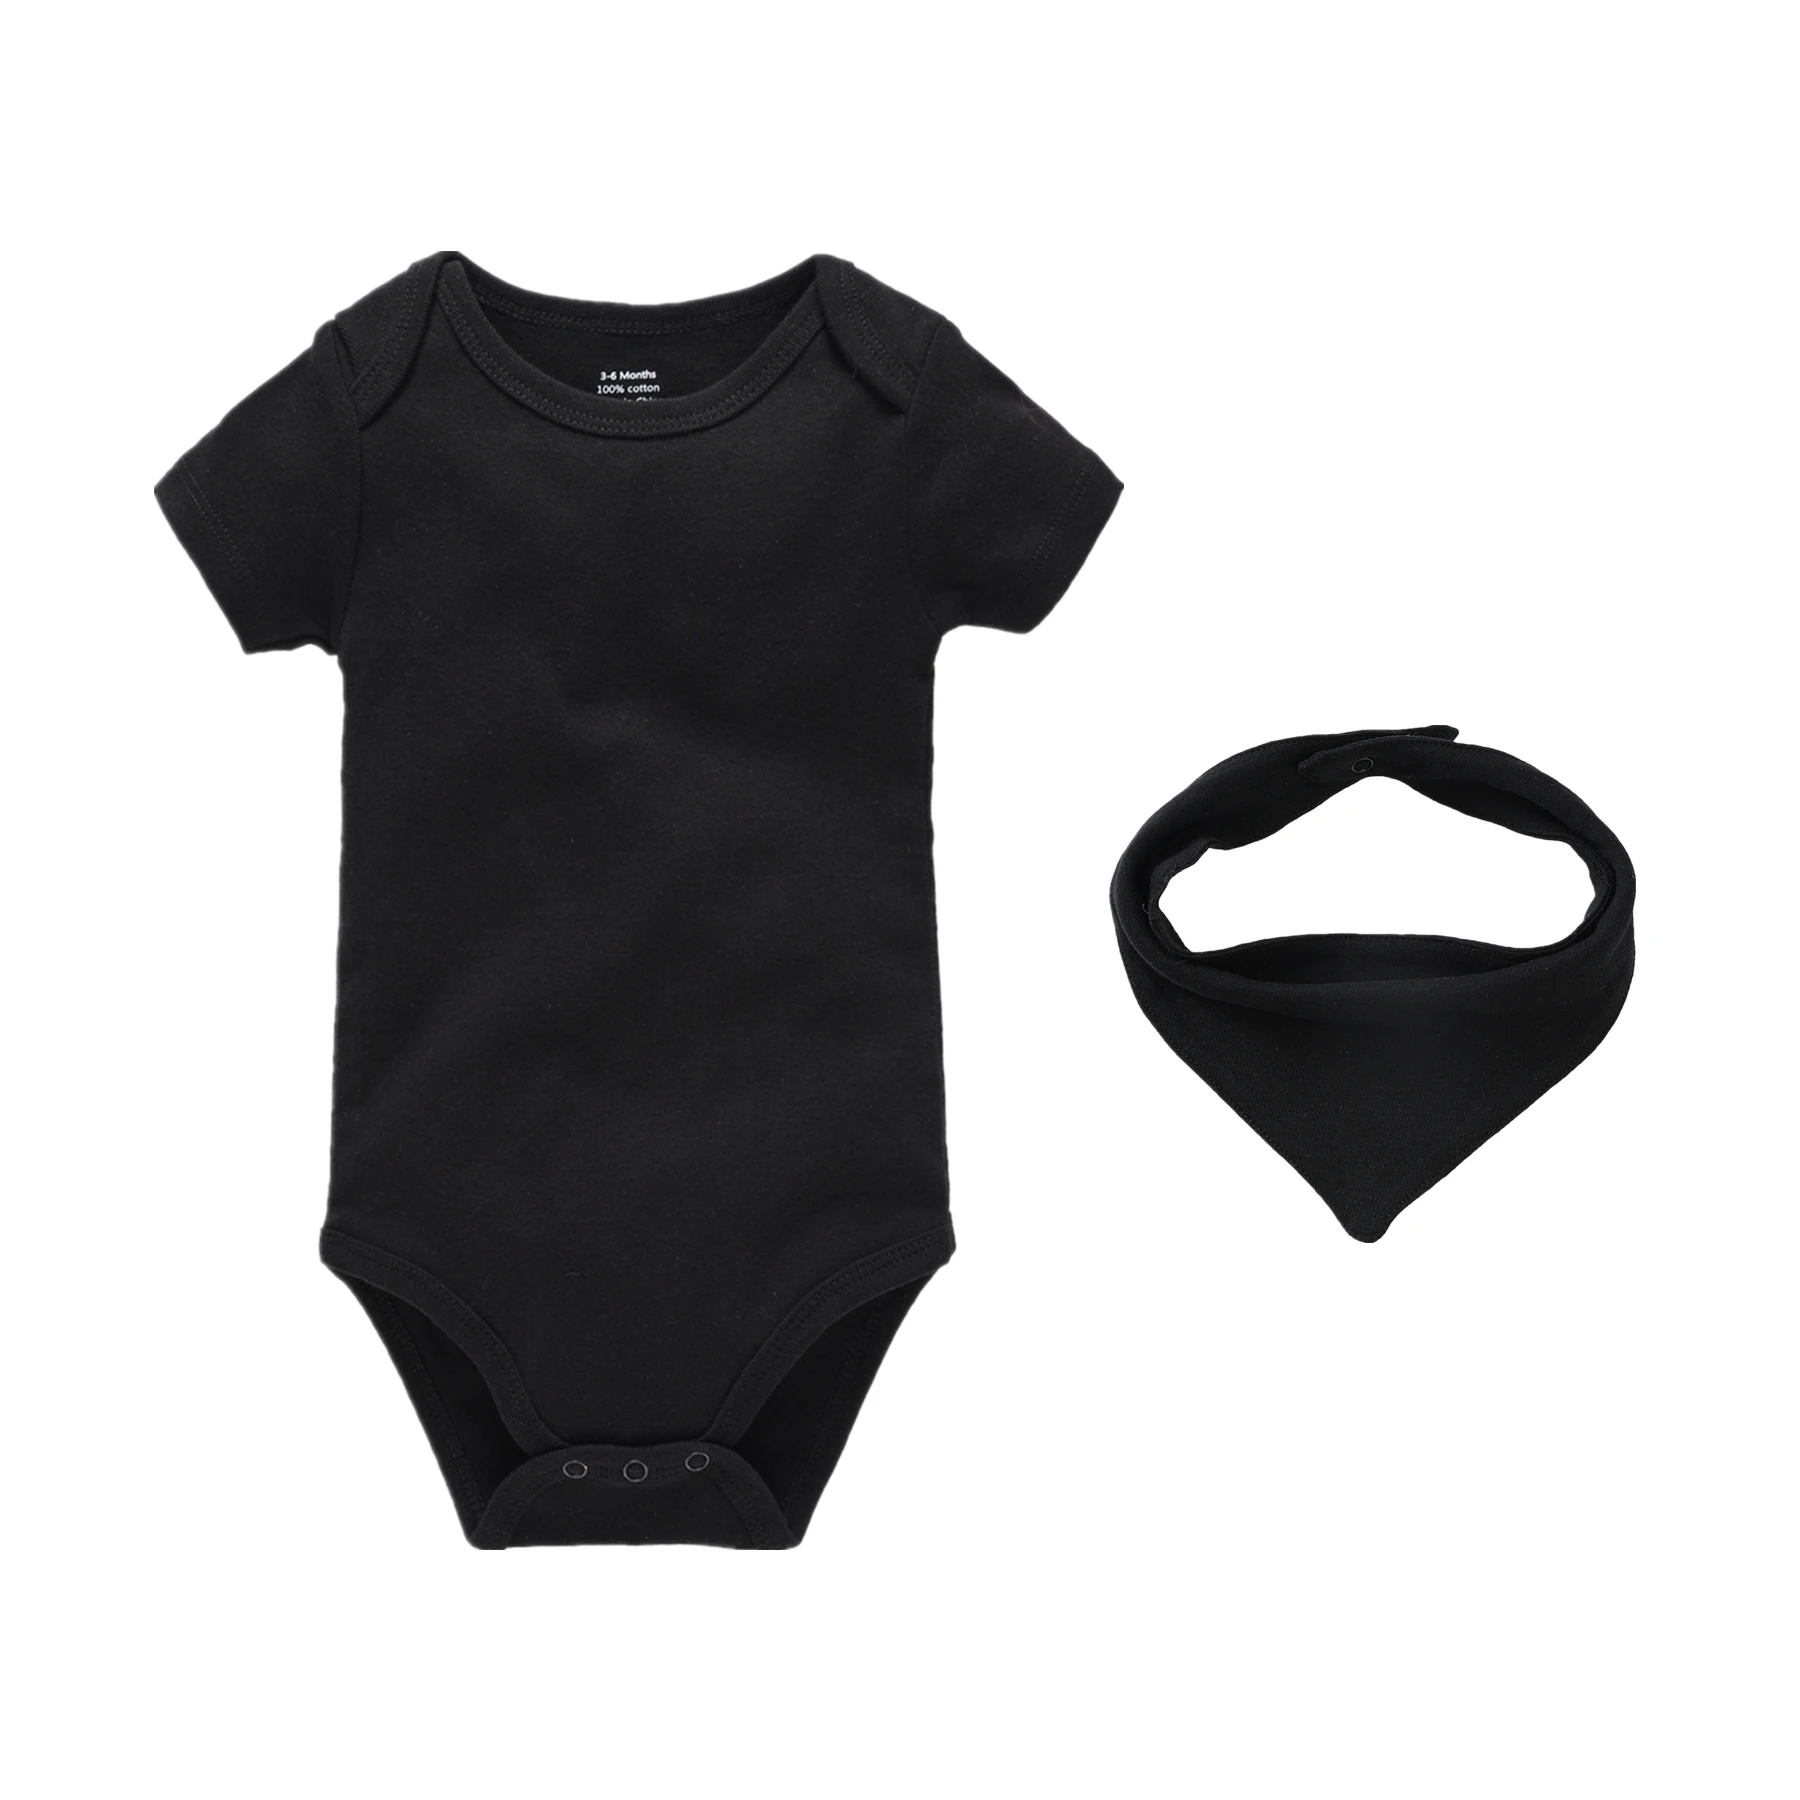 

Bebes Newborn Baby Rompers Cotton Unisex Long Sleeve Girls Jumpsuit 0-24M Infant Boys Jumper Onesie Solid Toddler Baby Clothing